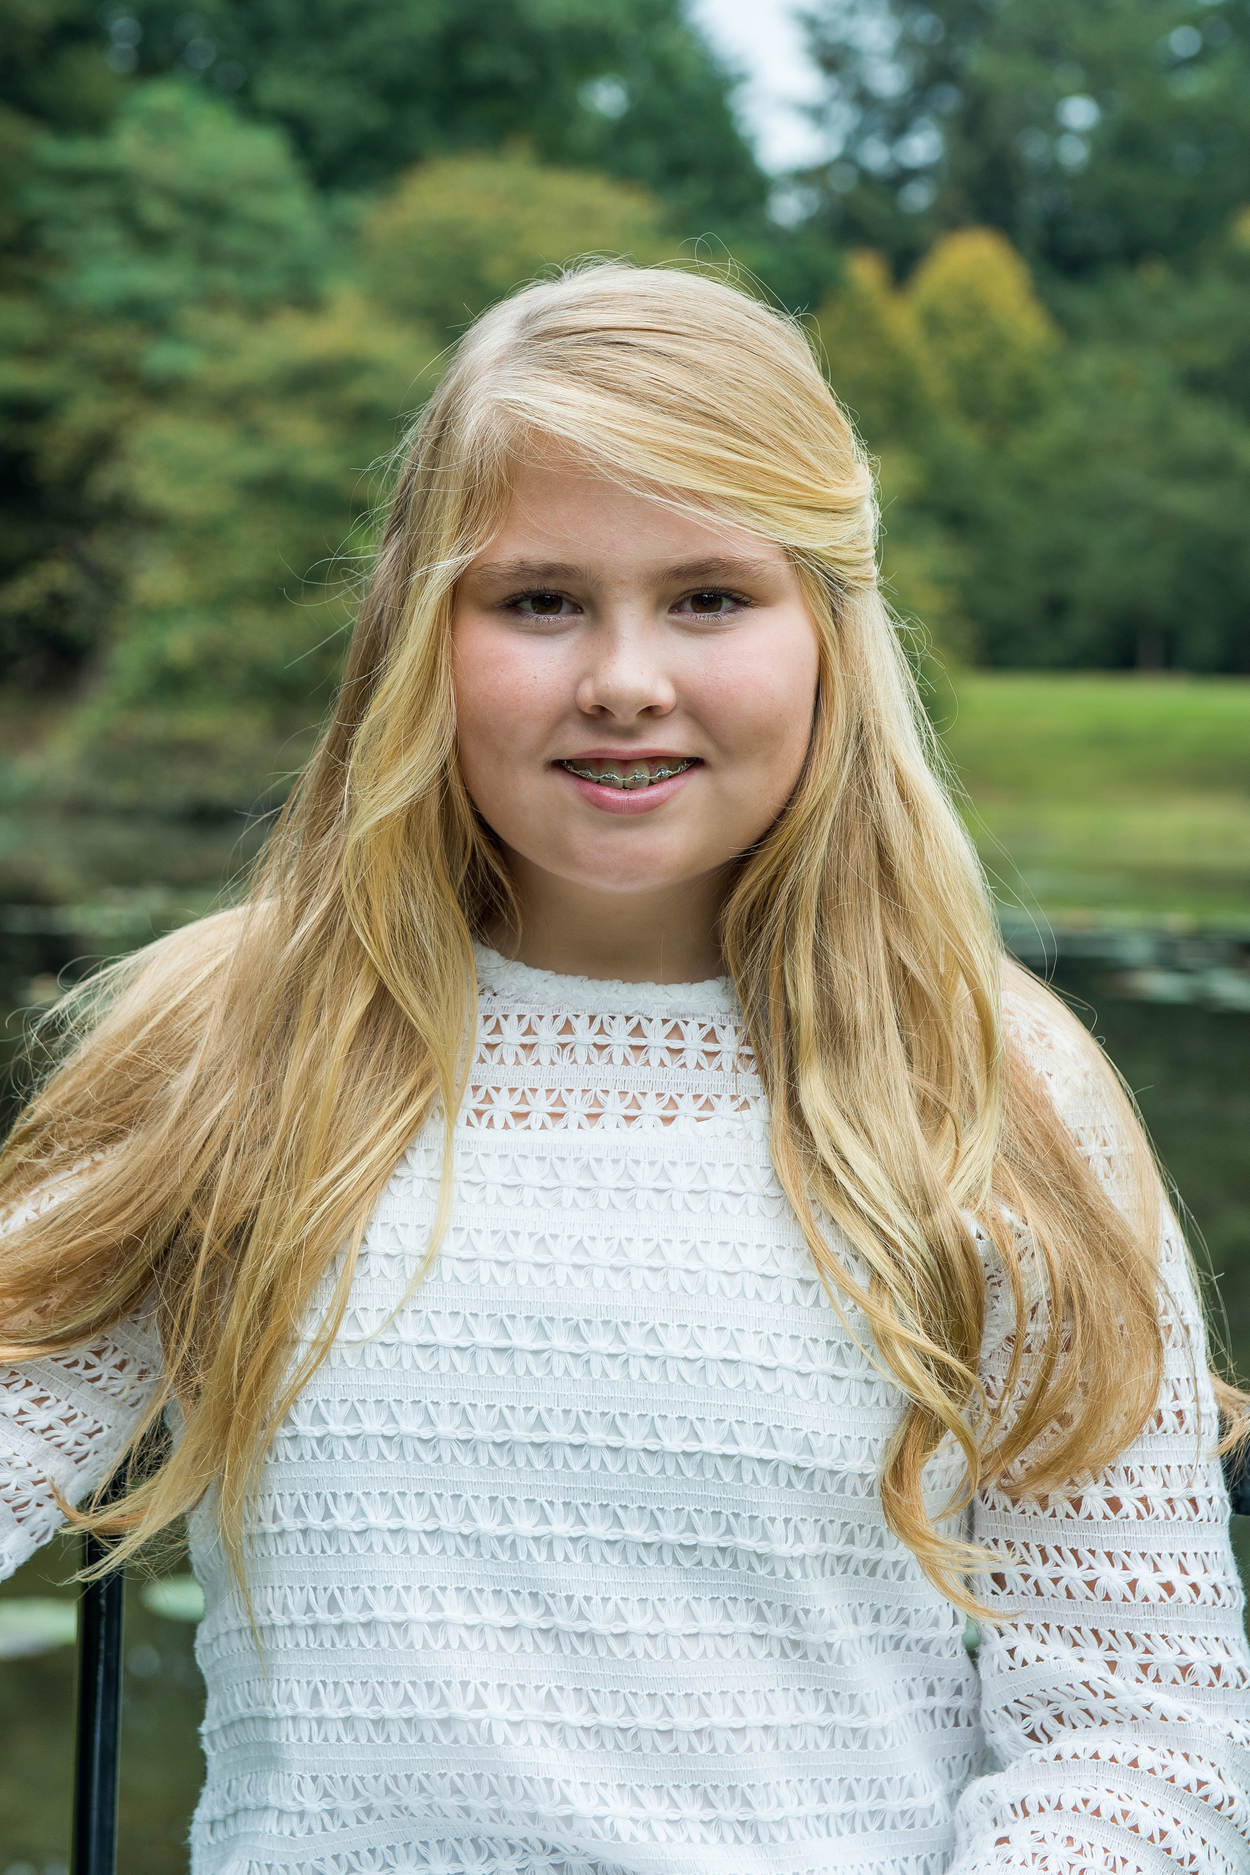 The Princess of Orange | Royal House of the Netherlands